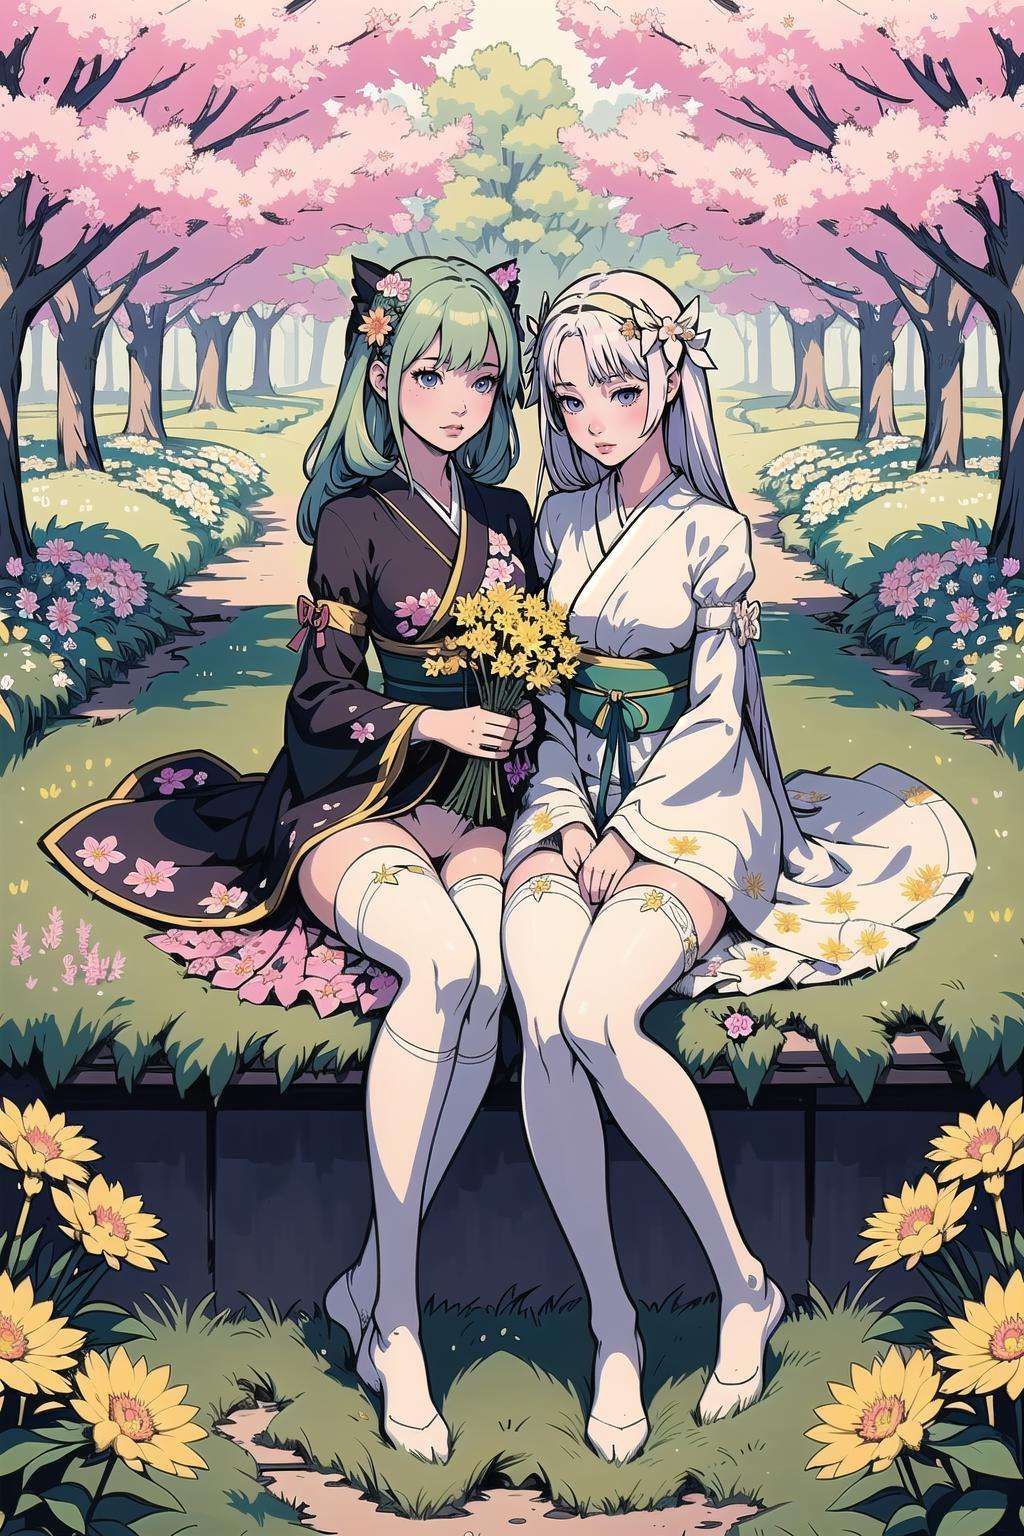 2girls, couple, cuddling, (masterpiece, best_quality, ultra-detailed, immaculate:1.3), epic, illustration, 1girl, (flowery Campcore:1.3) catgirl, full body, [:revealing, formal costume design,:0.2], official art, japanese, creepy pastel goldenrod lighting from above, on a  country road, bombshell hair, platinum hair, Hair Bow, pigeon pose